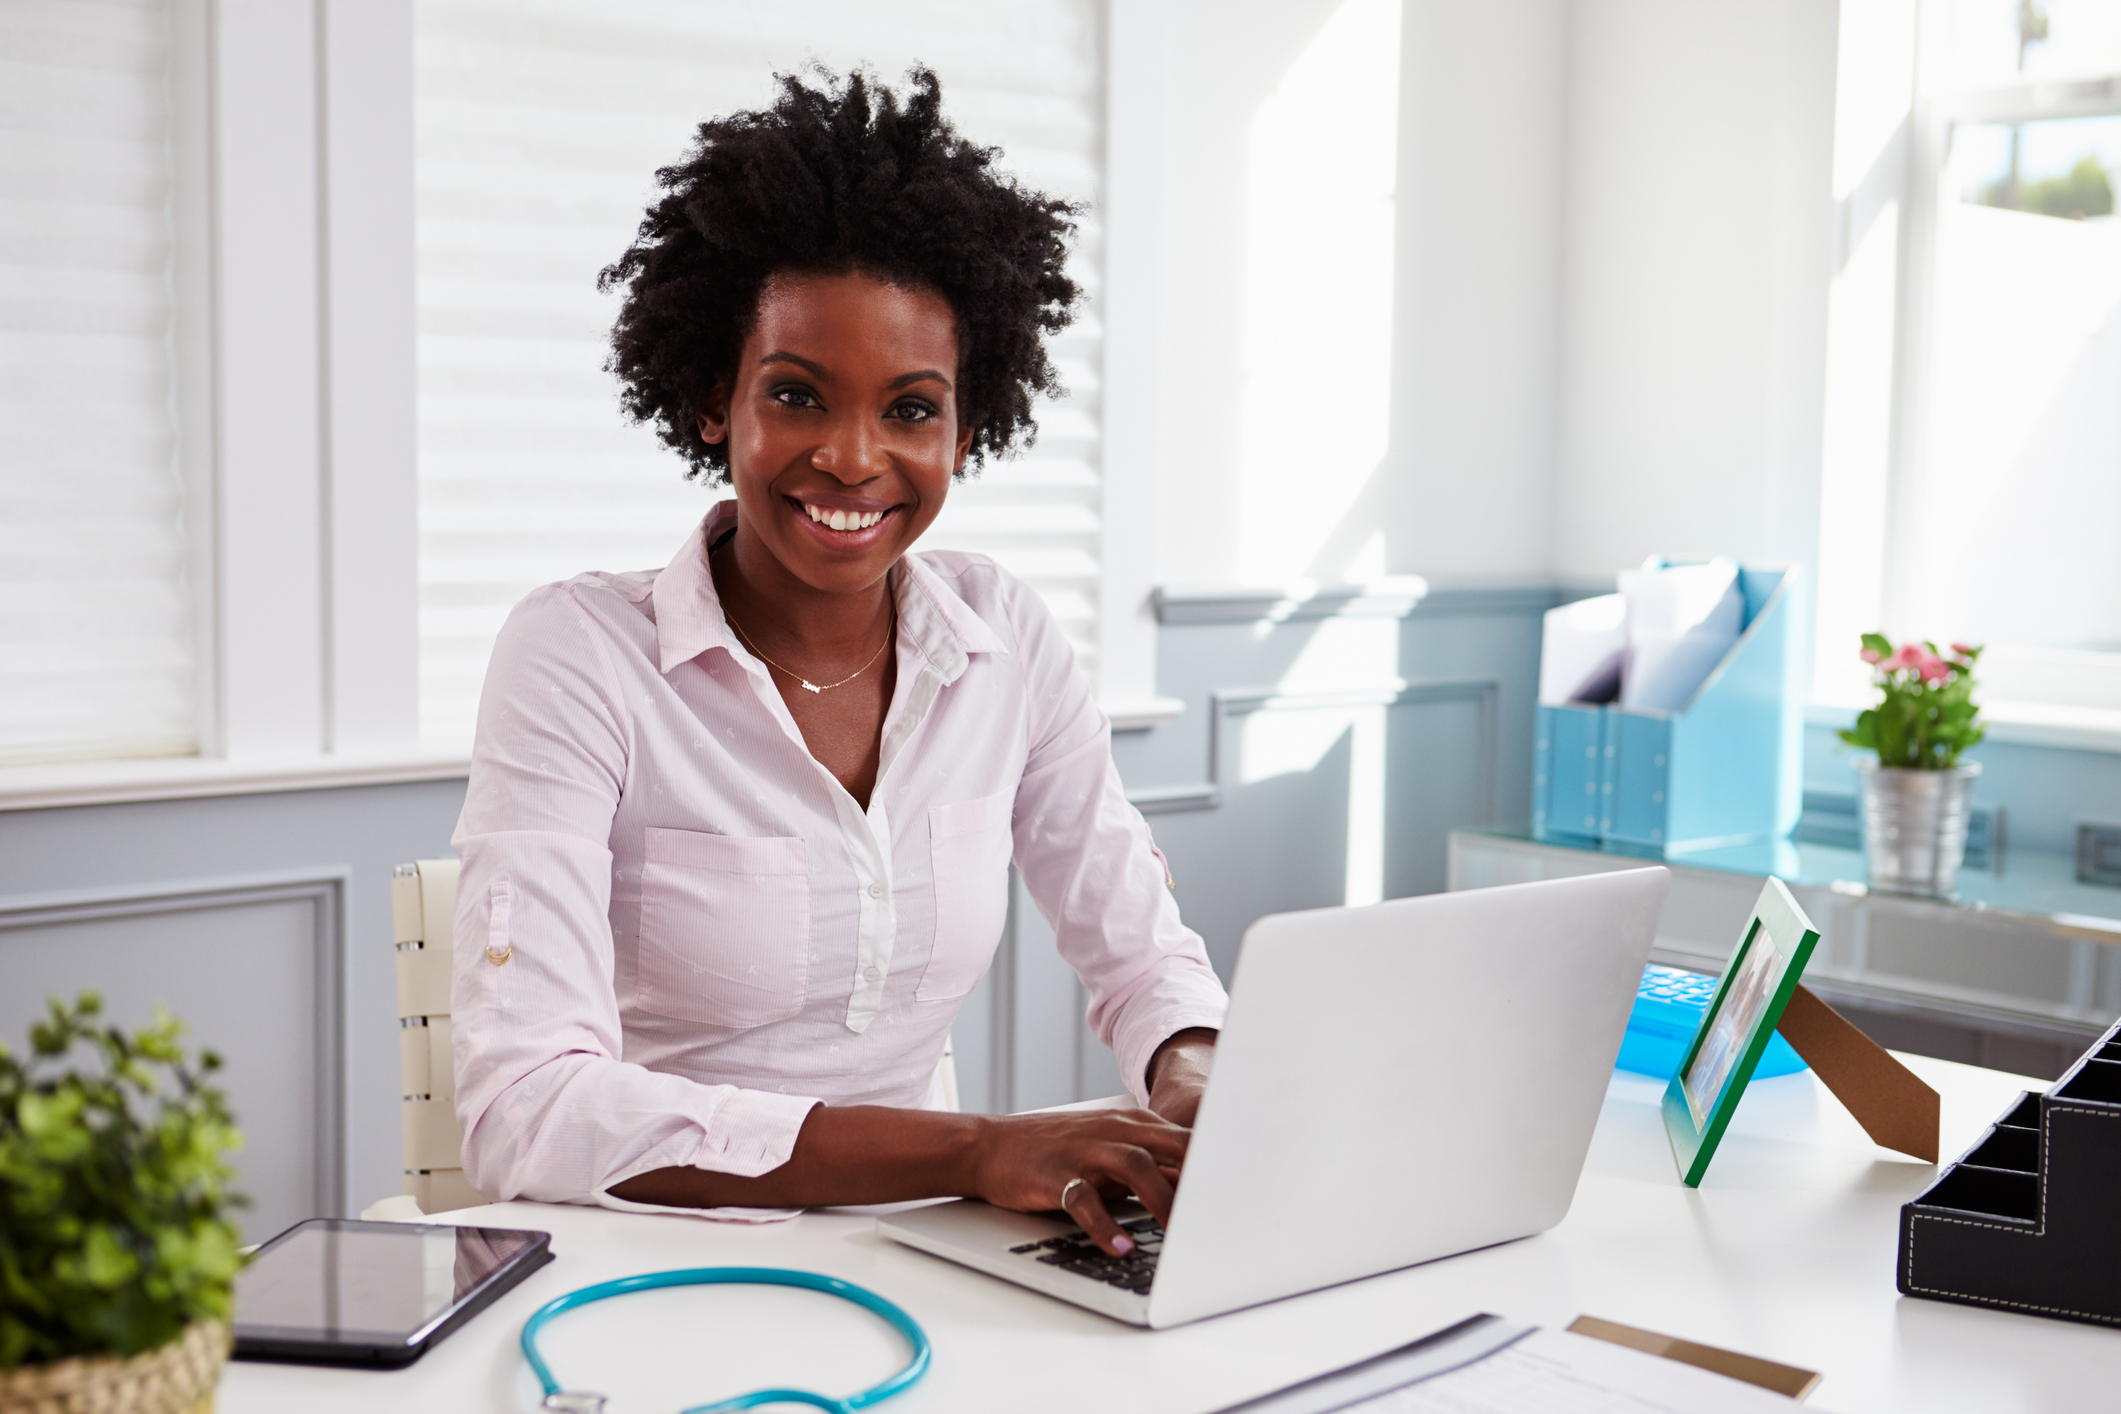 Black female doctor at work in an office, looking to camera